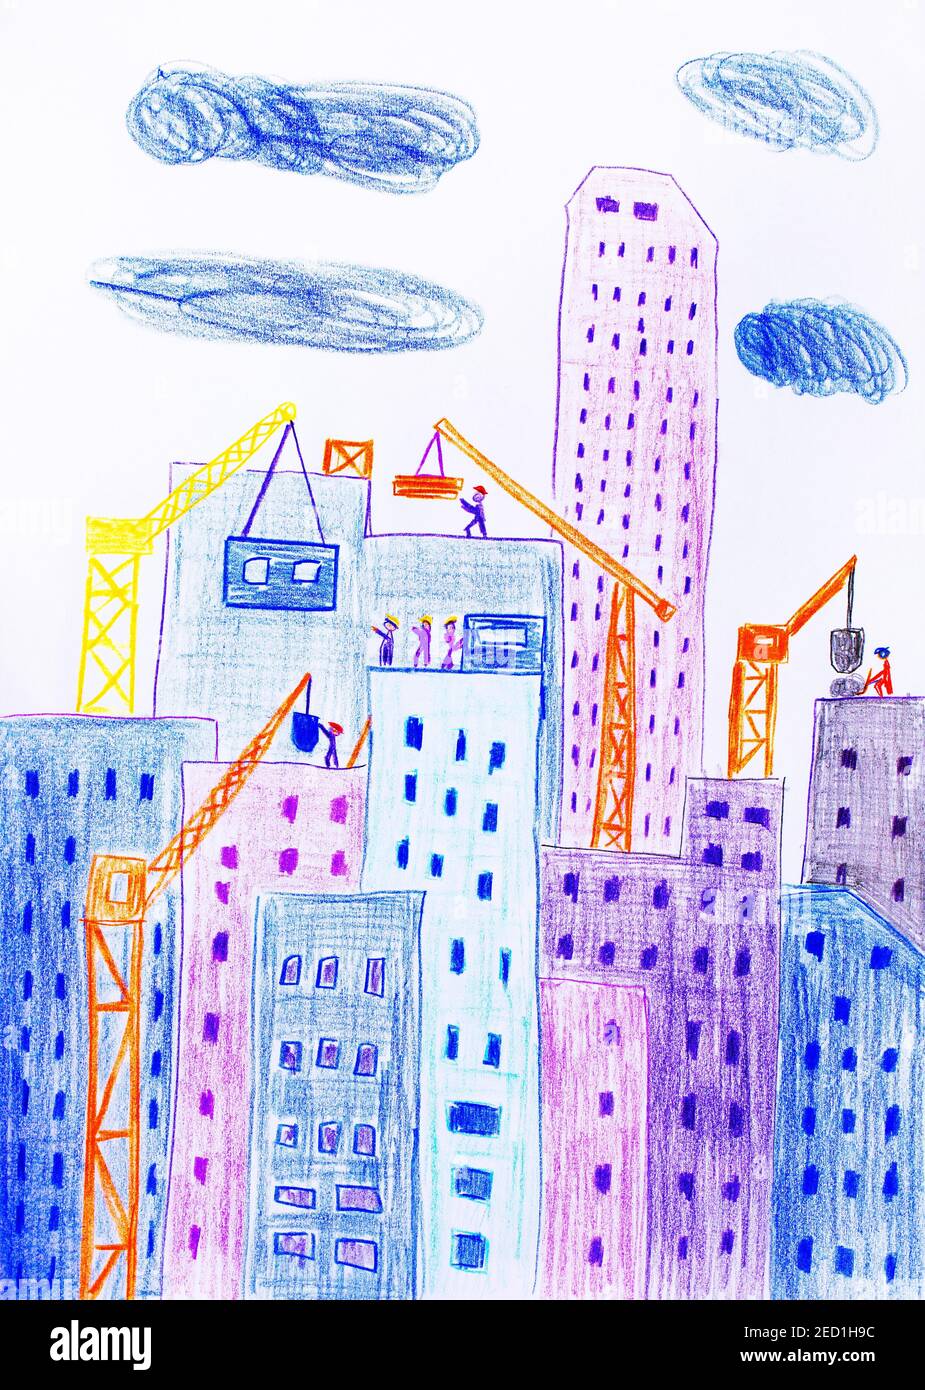 https://c8.alamy.com/comp/2ED1H9C/naive-illustration-childrens-drawing-construction-workers-building-a-high-rise-austria-2ED1H9C.jpg